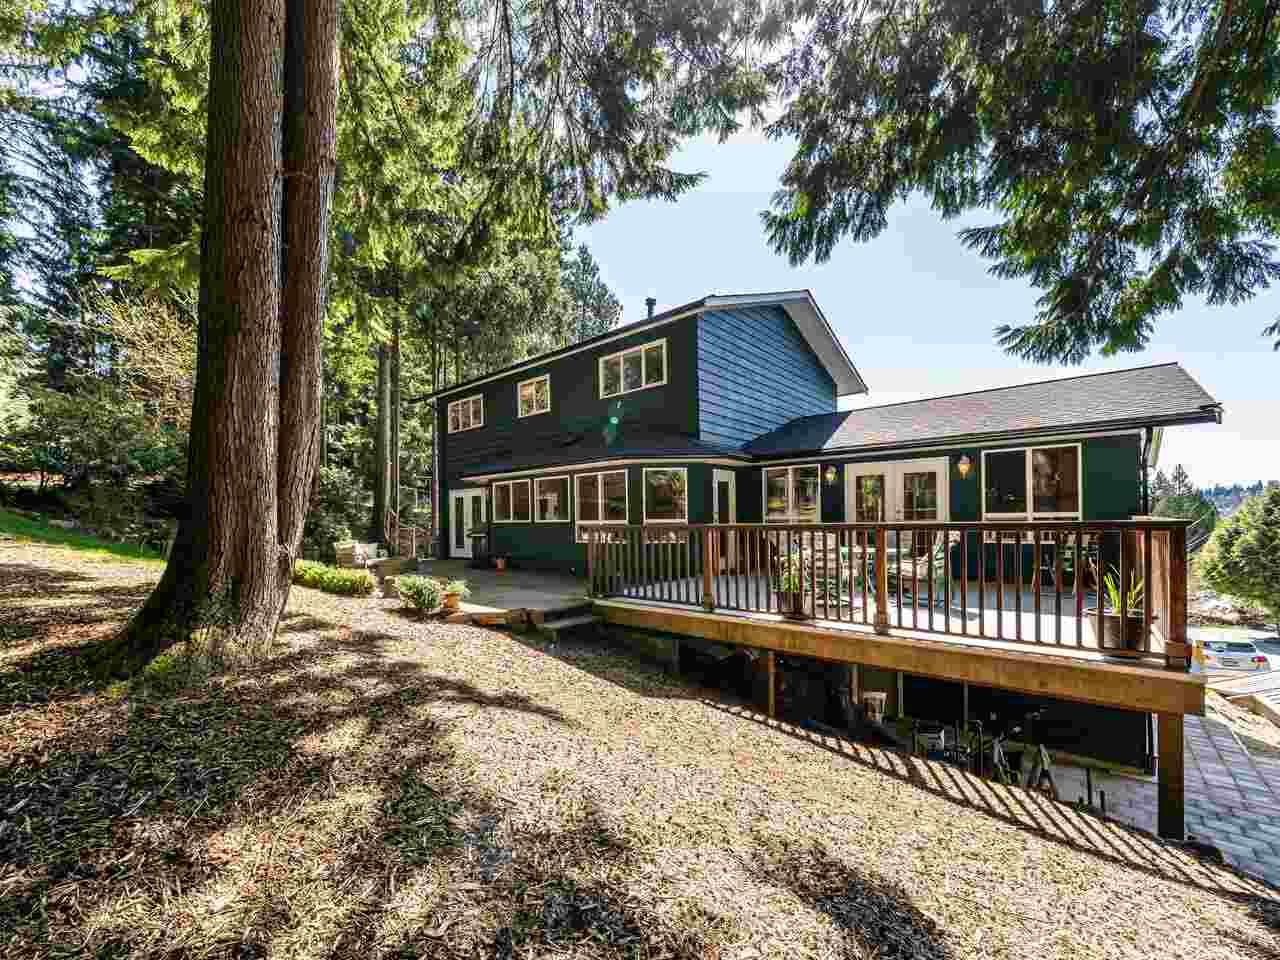 Main Photo: 15 MCNAIR BAY in : Barber Street House for sale (Port Moody)  : MLS®# R2566306